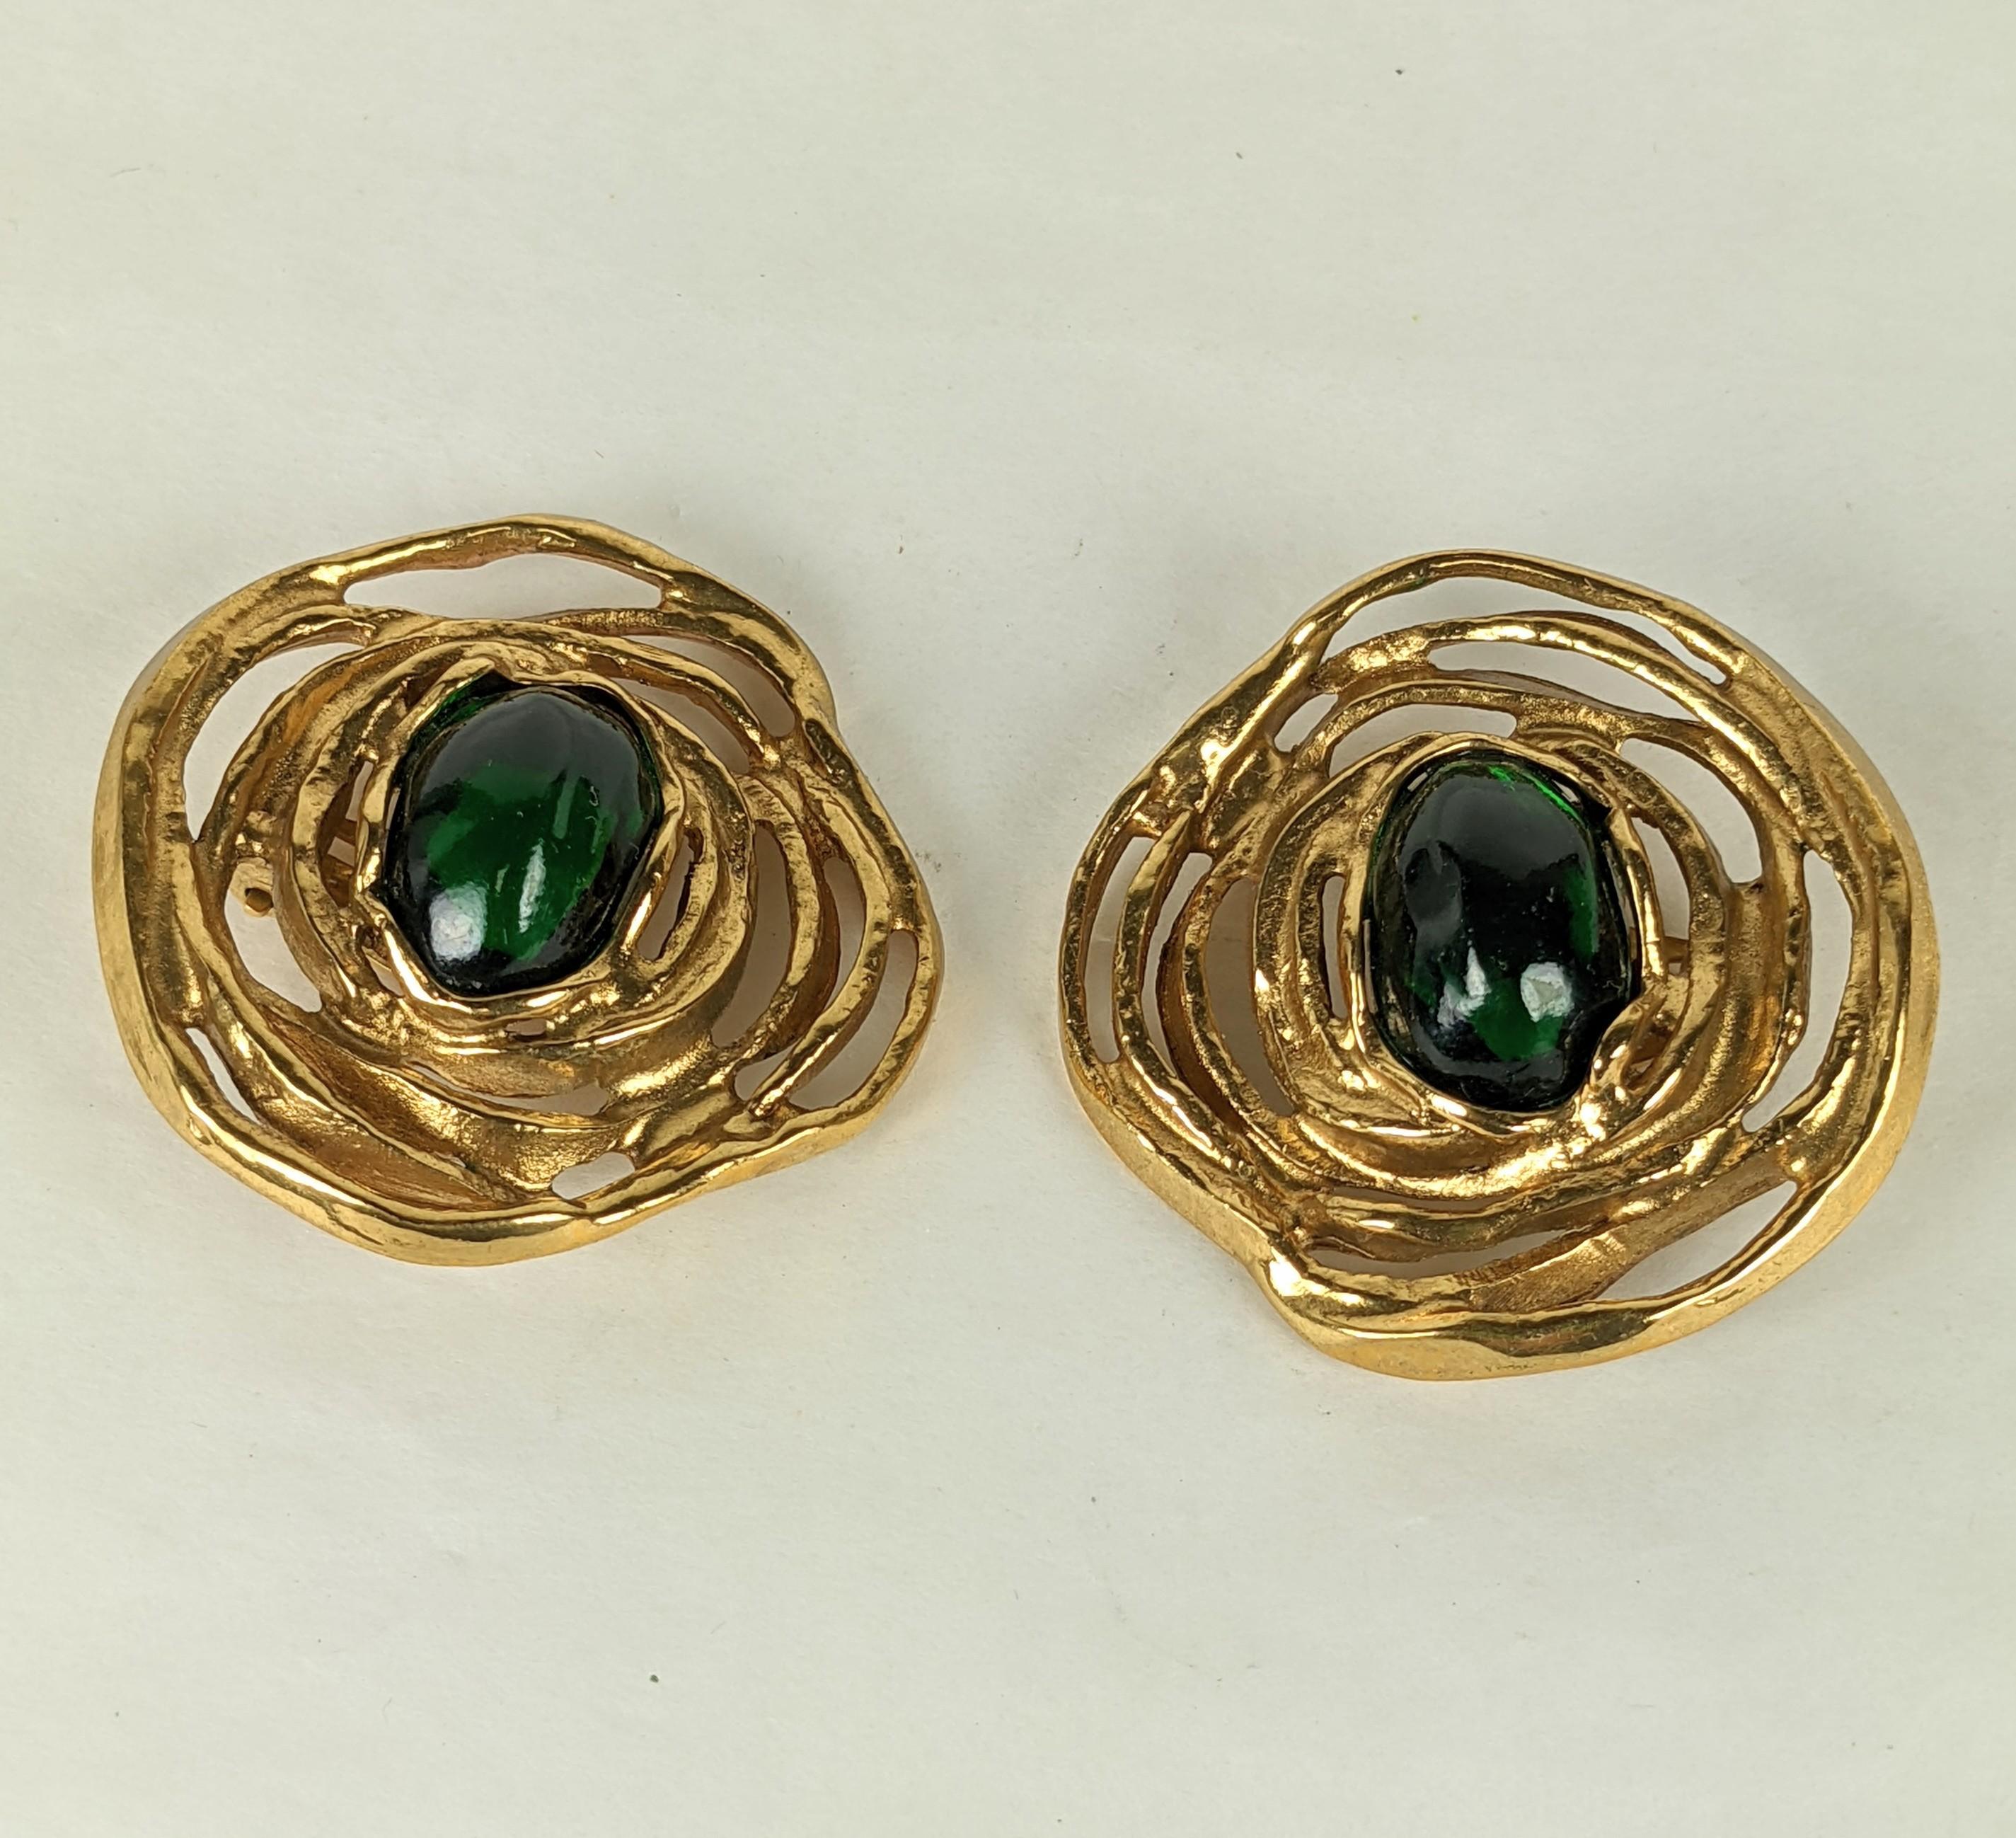 Yves Saint Laurent Gilt Spiral Earrings In Excellent Condition For Sale In New York, NY